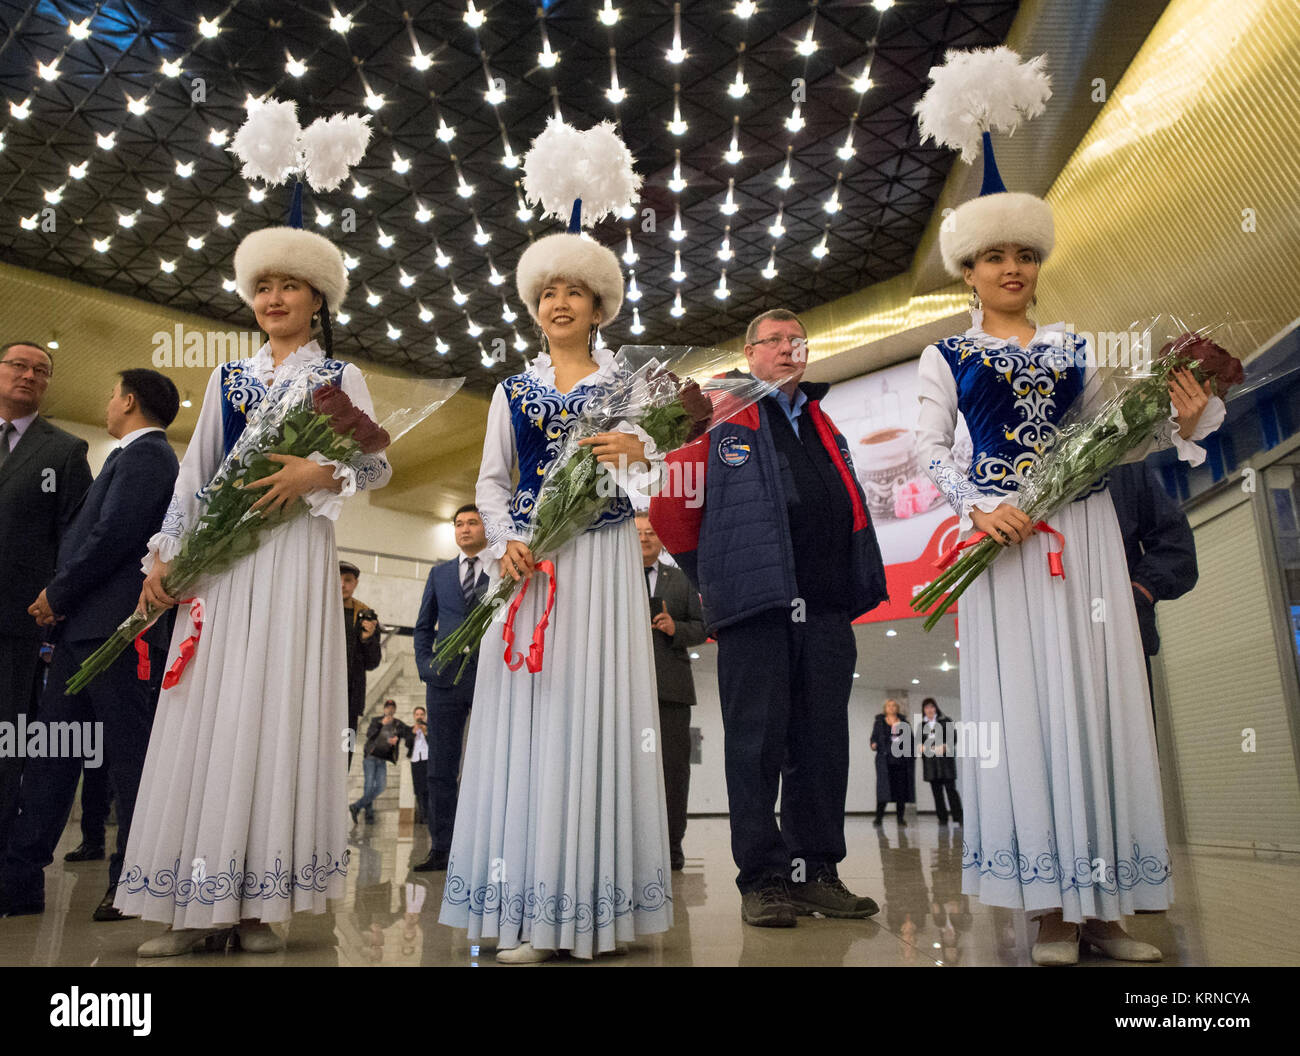 Girls in traditional Kazakhstan dress wait to welcome the return of Expedition 50 Commander Shane Kimbrough of NASA and Flight Engineers Sergey Ryzhikov and Andrey Borisenko of Roscosmos at a Karaganda Airport welcome ceremony in Kazakhstan on Monday, April 10, 2017. 2017 (Kazakh time). Kimbrough, Ryzhikov, and Borisenko are returning after 173 days in space where they served as members of the Expedition 49 and 50 crews onboard the International Space Station. Photo Credit: (NASA/Bill Ingalls) Expedition 50 Soyuz MS-02 Landing (NHQ201704100049) Stock Photo